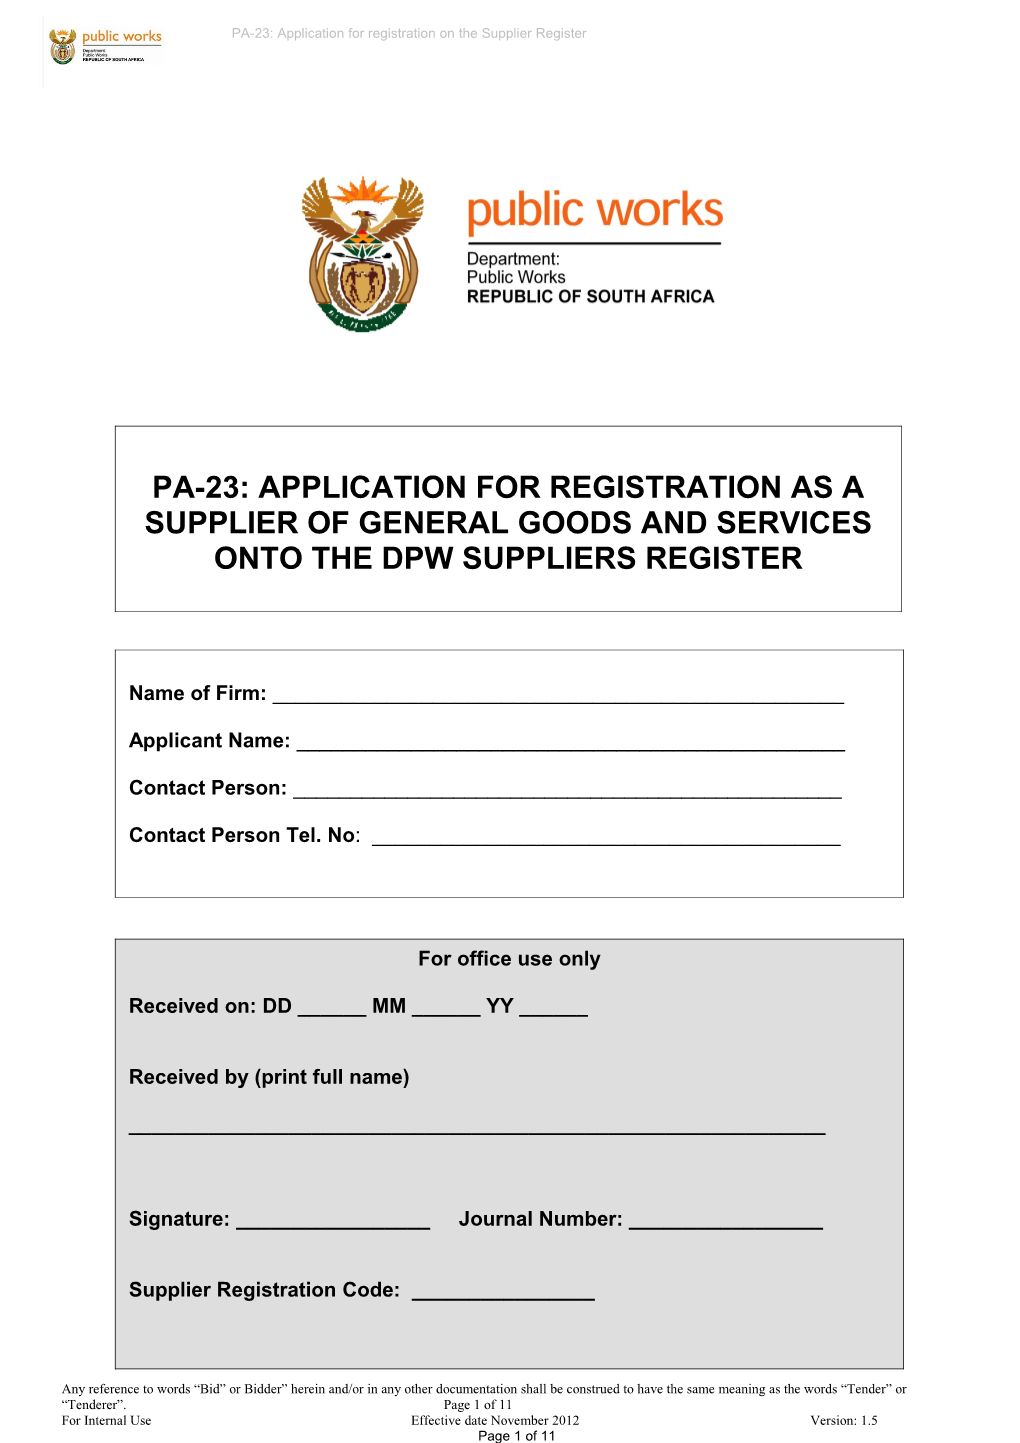 Terms of Reference for Registration Ontodepartment of Public Works (DPW) Suppliers Register